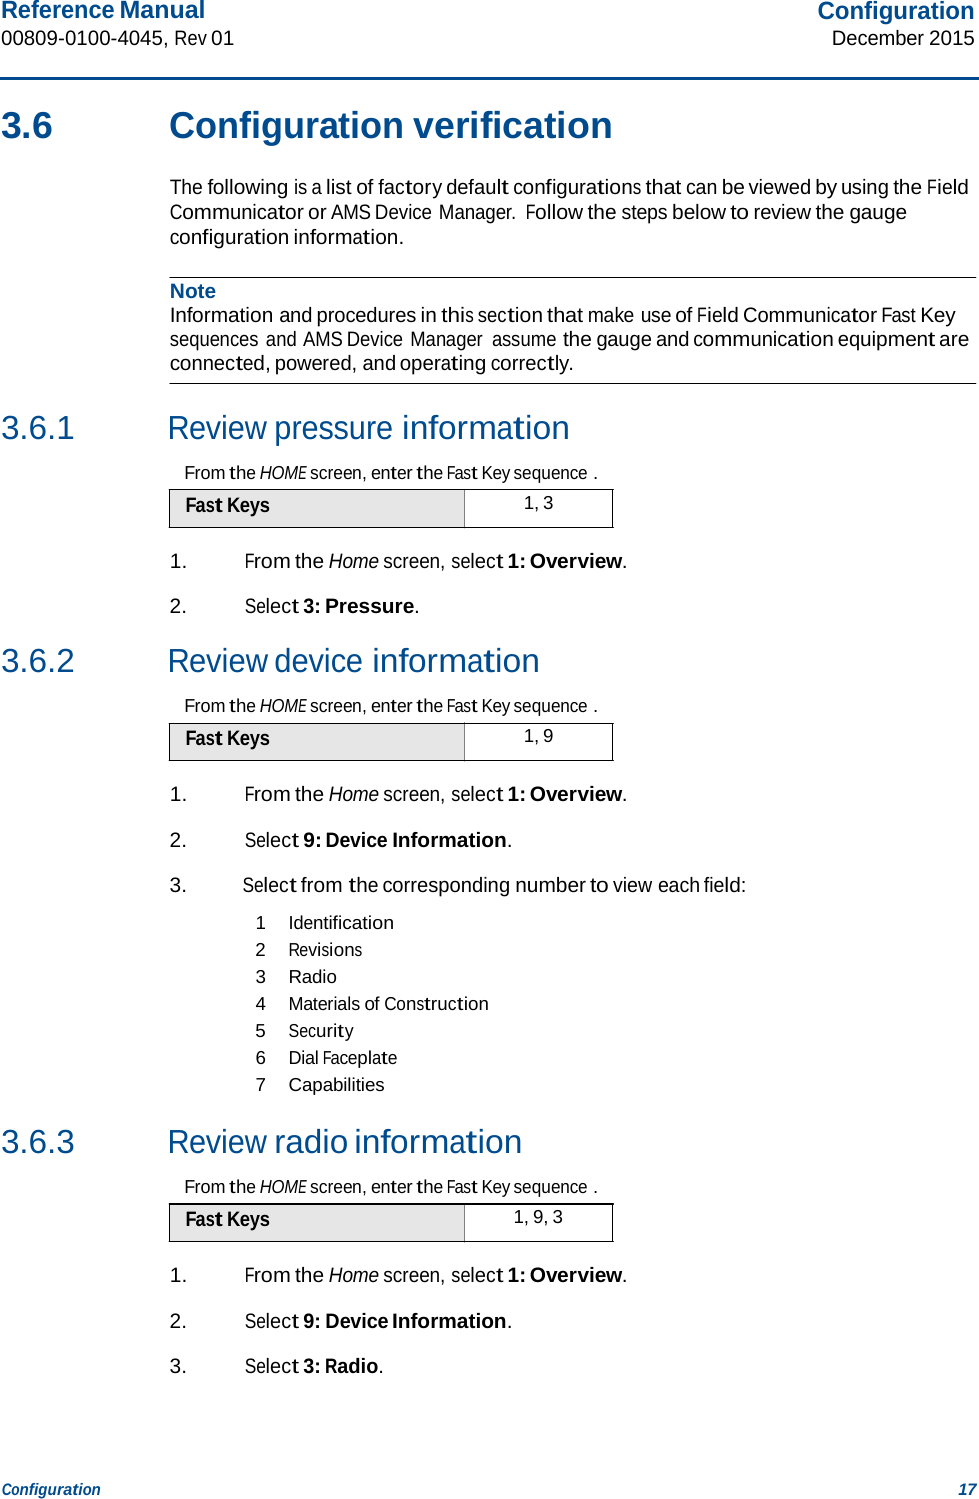 Reference Manual 00809-0100-4045, Rev 01 Configuration December 2015 Configuration 17    3.6  Configuration verification  The following is a list of factory default configurations that can be viewed by using the Field Communicator or AMS Device Manager. Follow the steps below to review the gauge configuration information.  Note Information and procedures in this section that make use of Field Communicator Fast Key sequences and AMS Device Manager  assume the gauge and communication equipment are connected, powered, and operating correctly.   3.6.1 Review pressure information  From the HOME screen, enter the Fast Key sequence . Fast Keys  1, 3  1. From the Home screen, select 1: Overview.  2. Select 3: Pressure.  3.6.2 Review device information  From the HOME screen, enter the Fast Key sequence . Fast Keys  1, 9  1. From the Home screen, select 1: Overview.  2. Select 9: Device Information.  3. Select from the corresponding number to view each field:  1 Identification 2 Revisions 3  Radio 4 Materials of Construction 5 Security 6 Dial Faceplate 7  Capabilities  3.6.3 Review radio information  From the HOME screen, enter the Fast Key sequence . Fast Keys  1, 9, 3  1. From the Home screen, select 1: Overview.  2. Select 9: Device Information.  3. Select 3: Radio. 